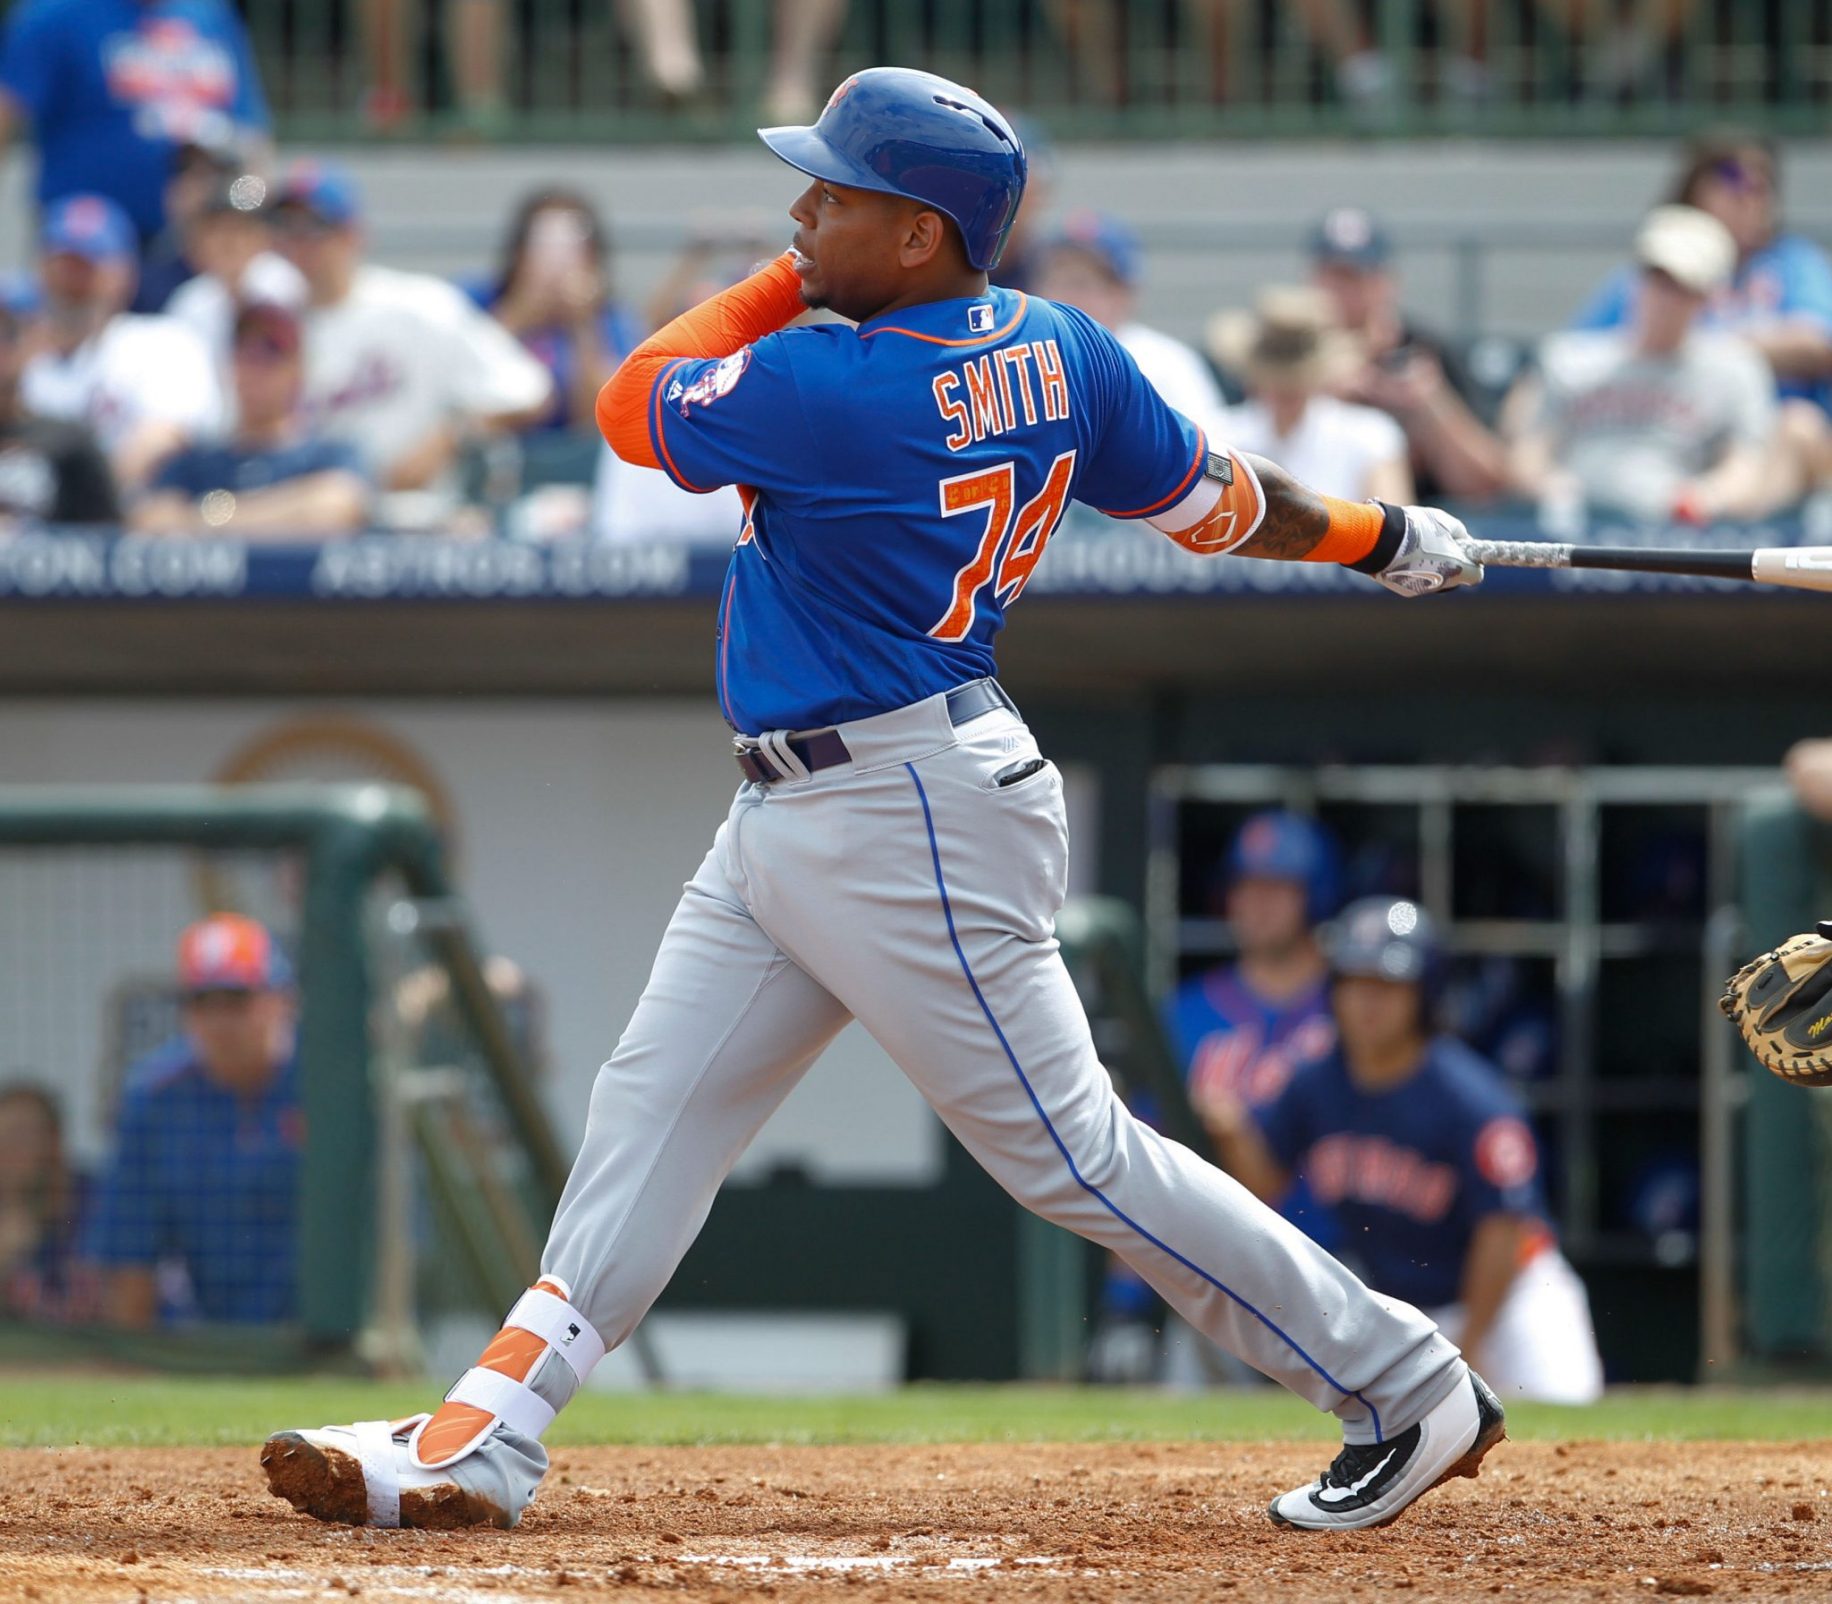 Mar 5, 2016; Kissimmee, FL, USA; New York Mets first baseman Dominic Smith (74) bats during a spring training baseball game against the Houston Astros at Osceola County Stadium. Mandatory Credit: Reinhold Matay-USA TODAY Sports